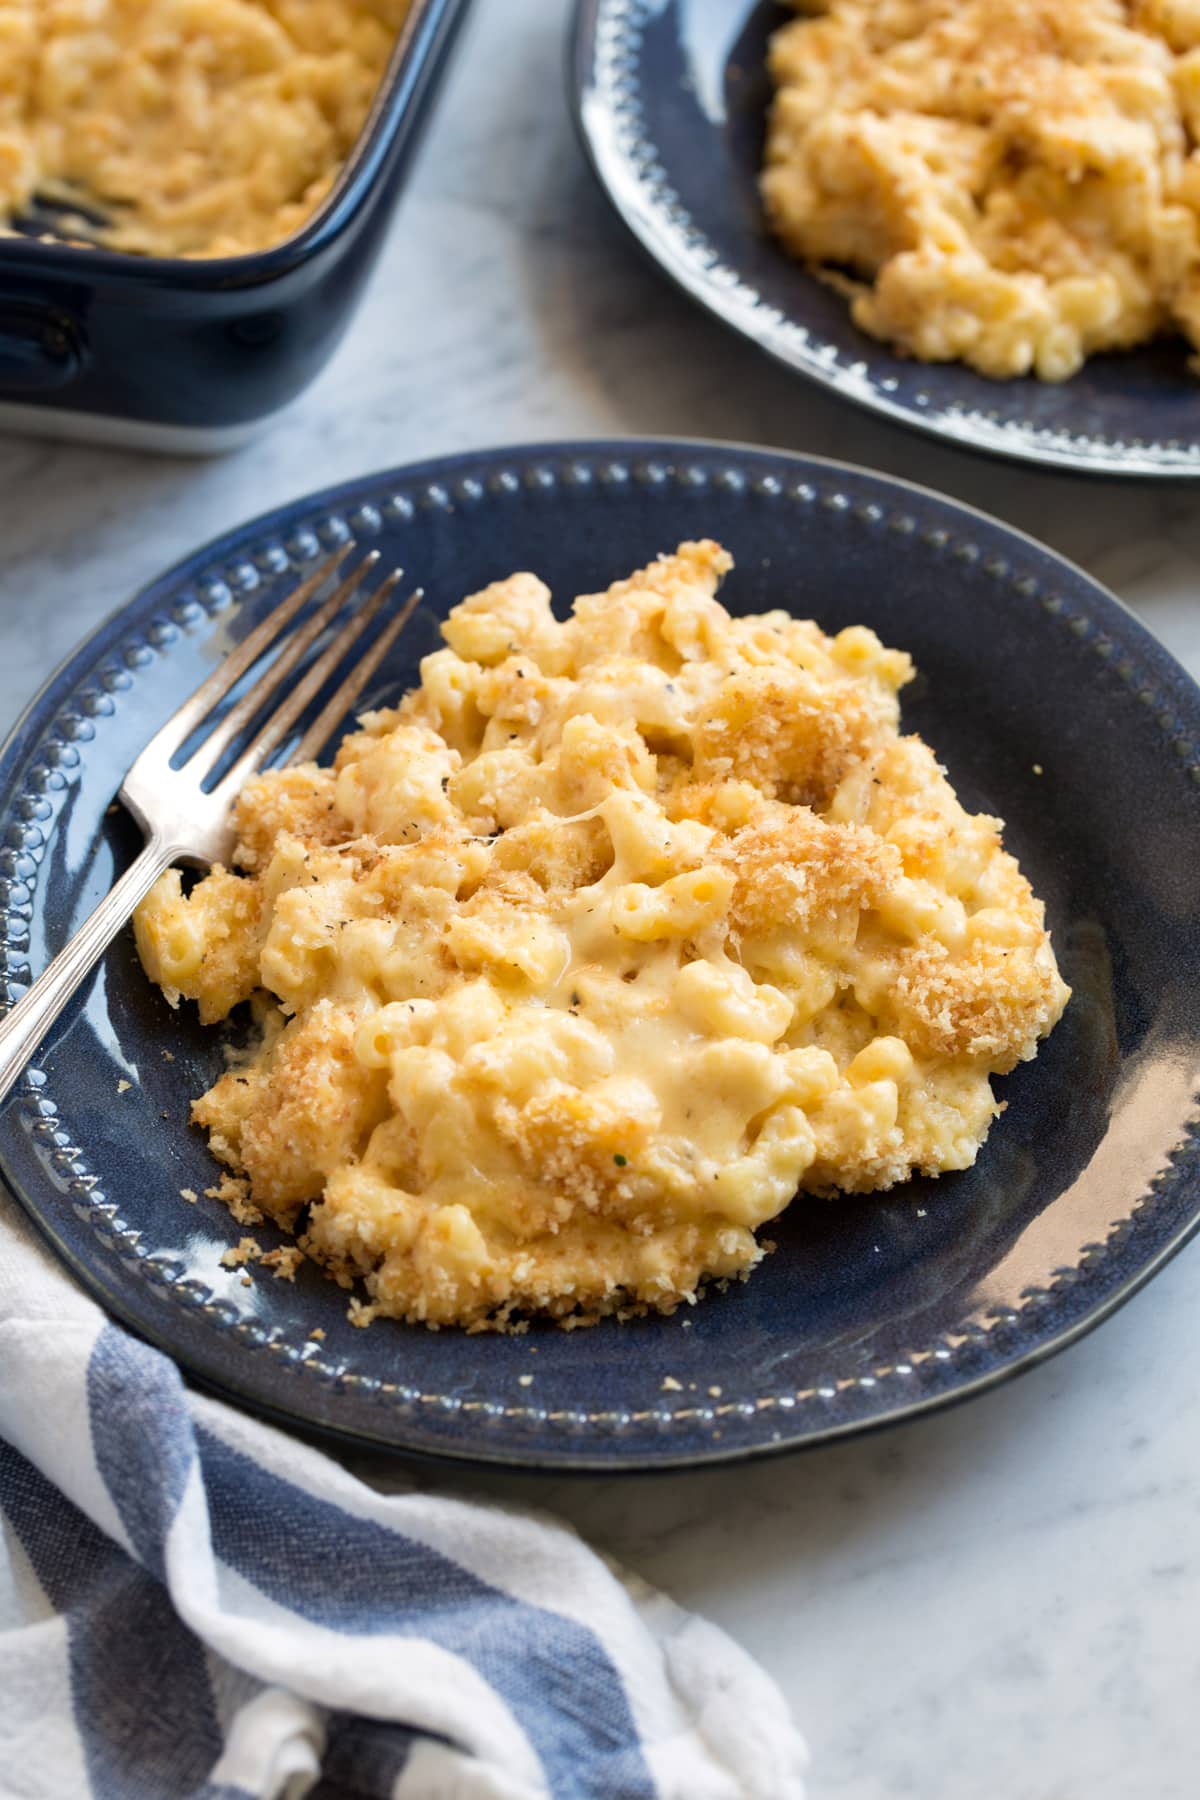 Single serving of Baked Mac and Cheese on a navy blue side plate.